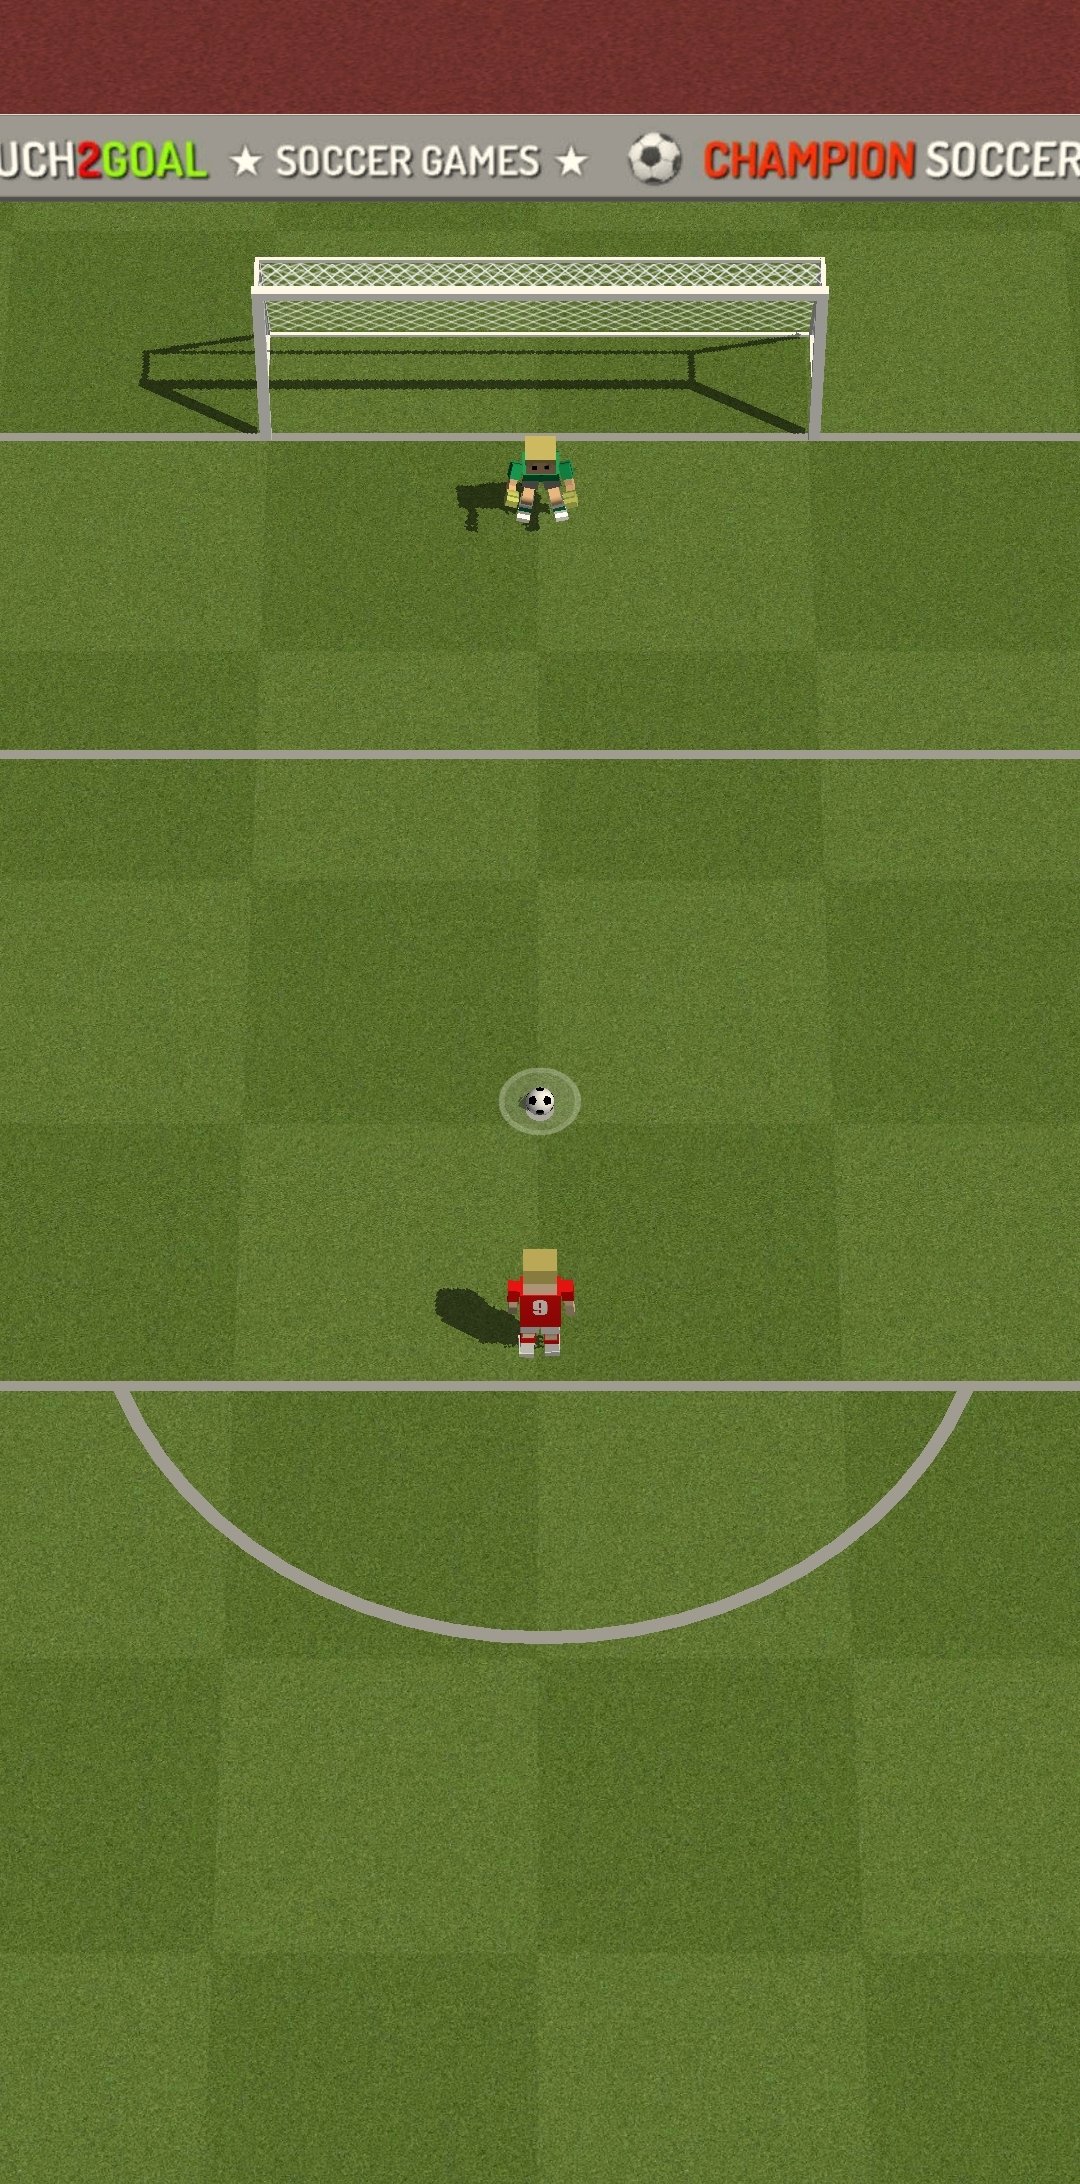 Champion Soccer Star: Cup Game - Apps on Google Play